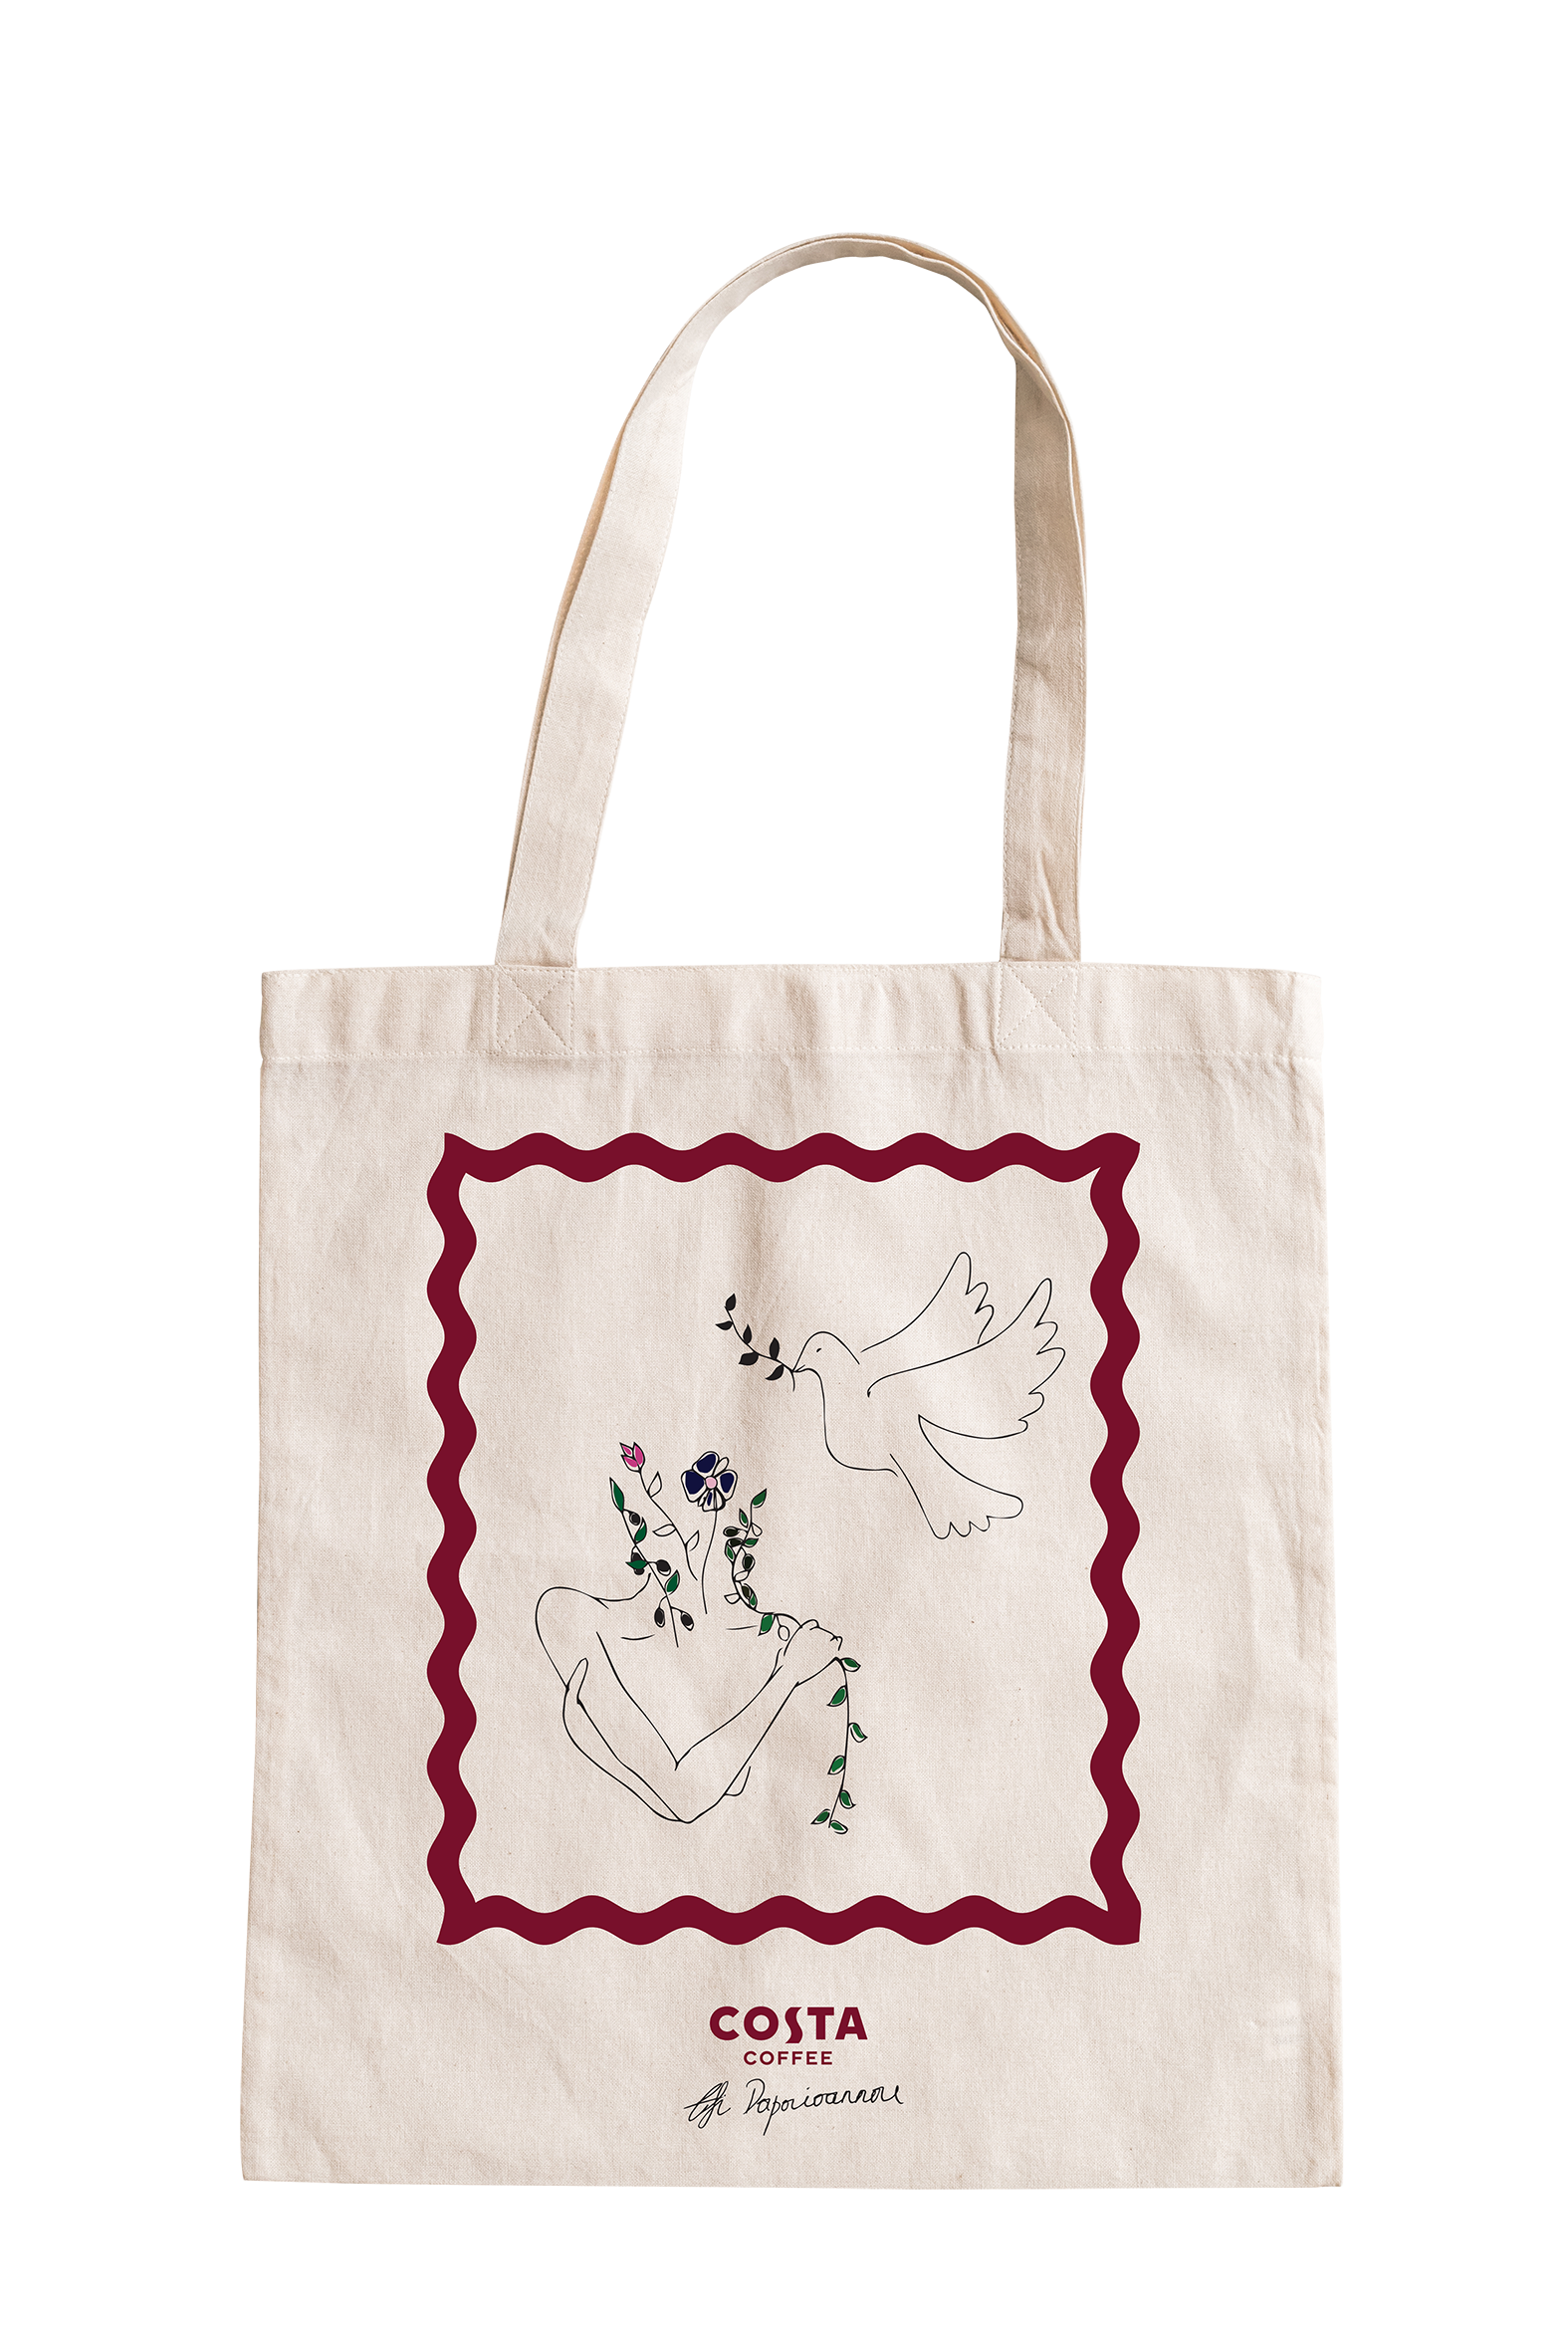 COSTA COFFEE – LIMITED EDITION TOTE BAGS